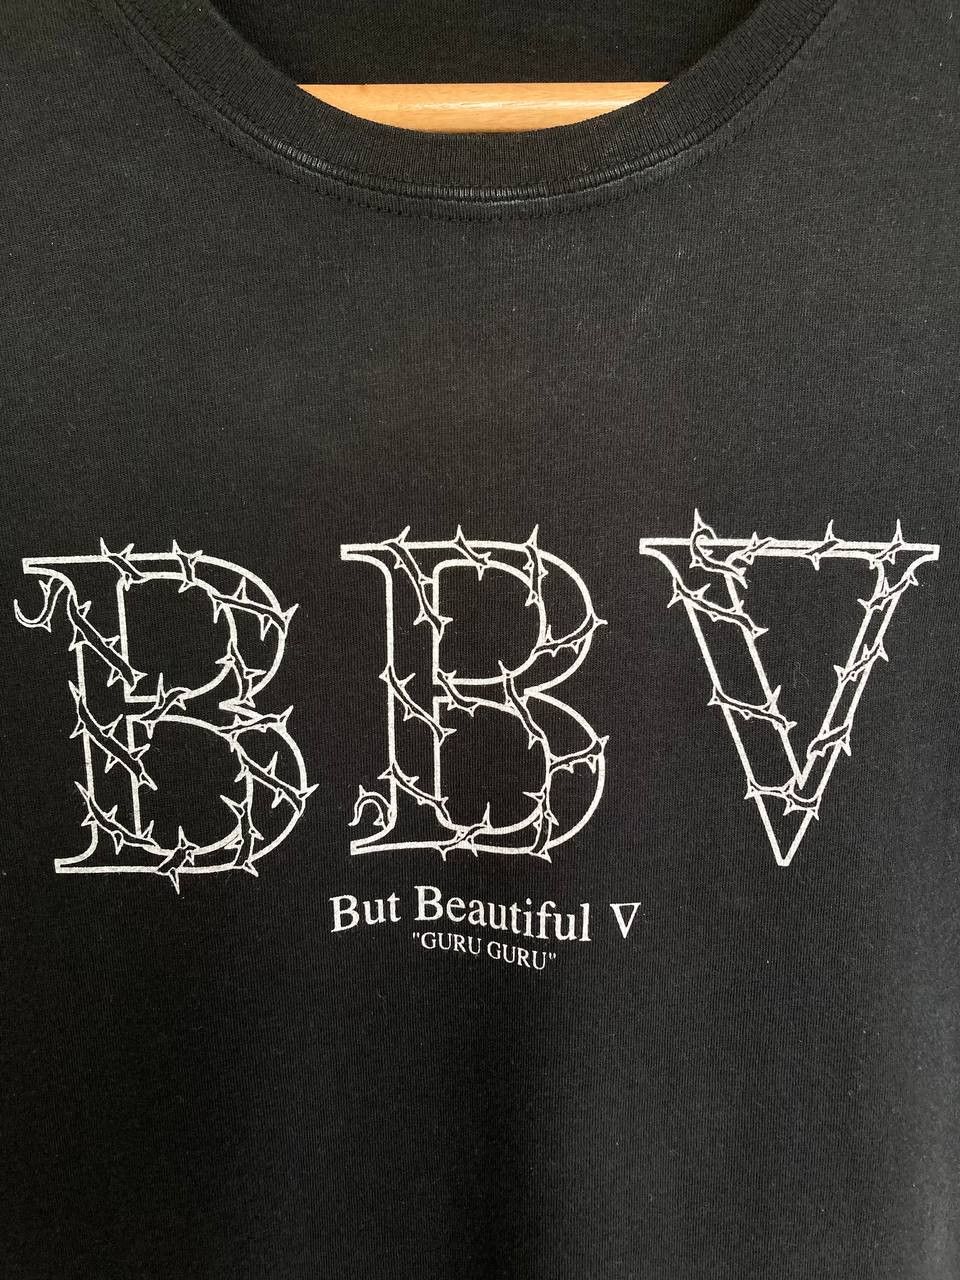 AW06 Undercover “But Beautiful V” Tee - 6